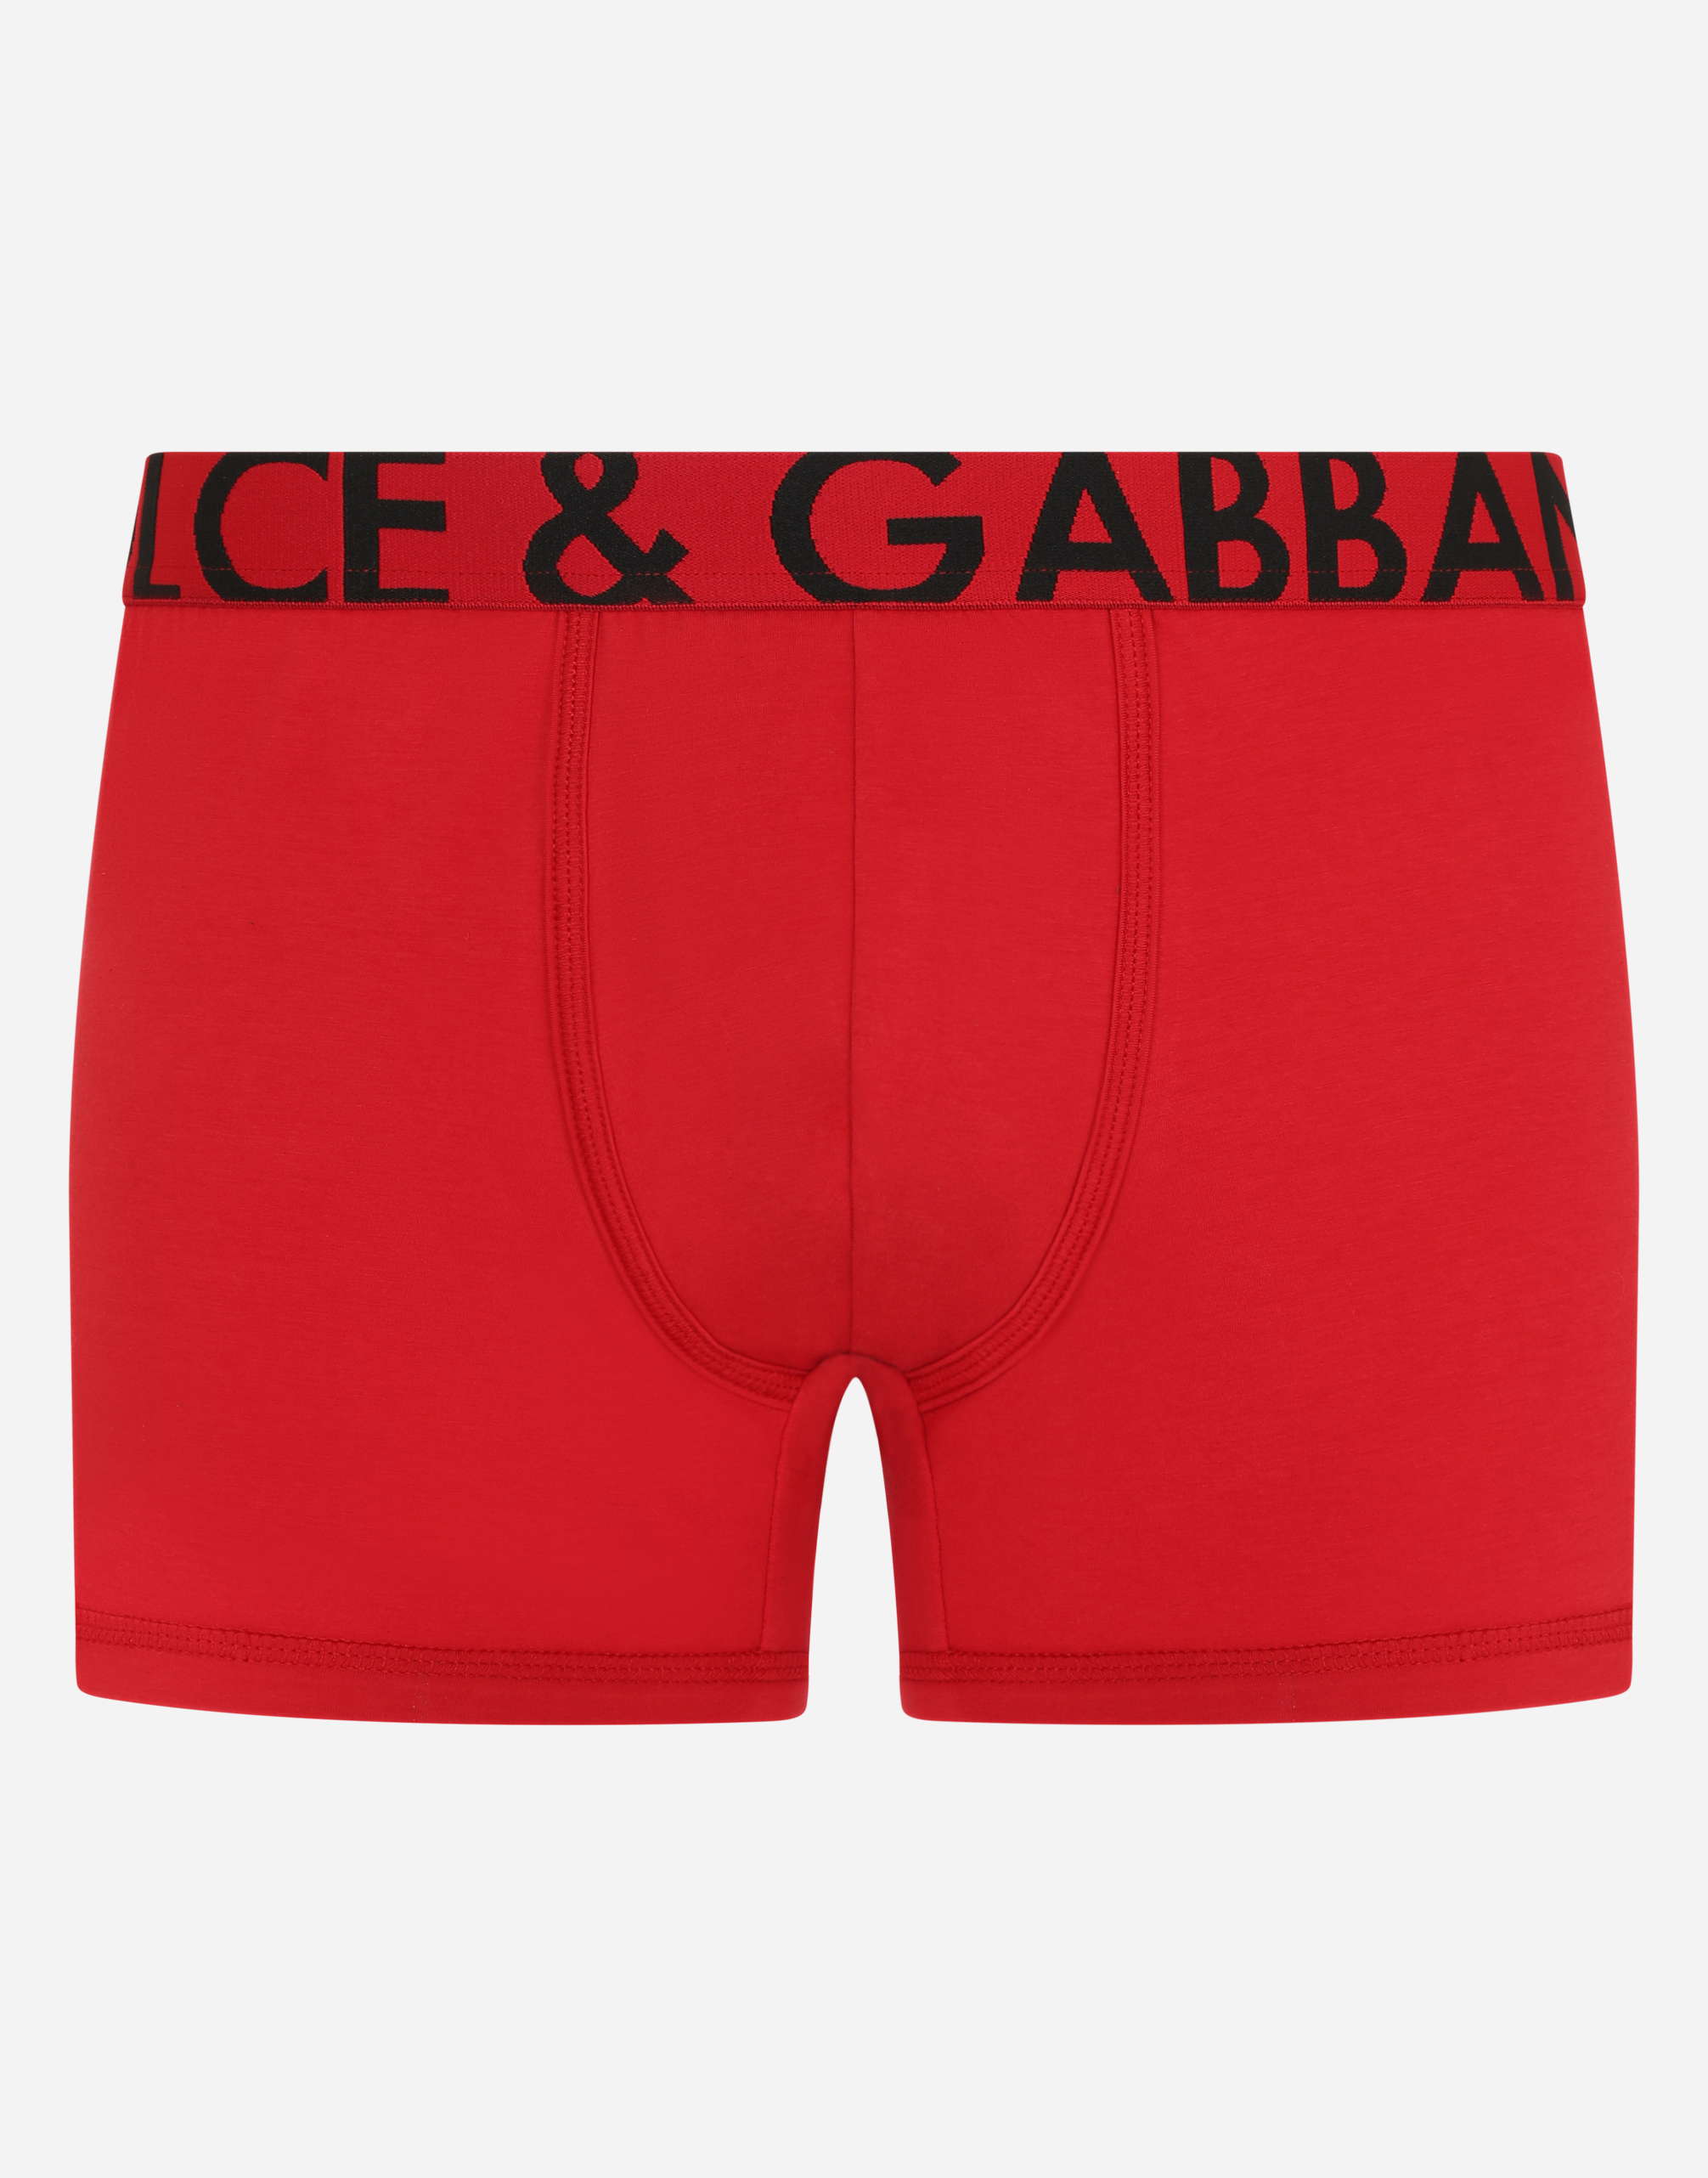 Two-way-stretch cotton jersey boxers in Bordeaux